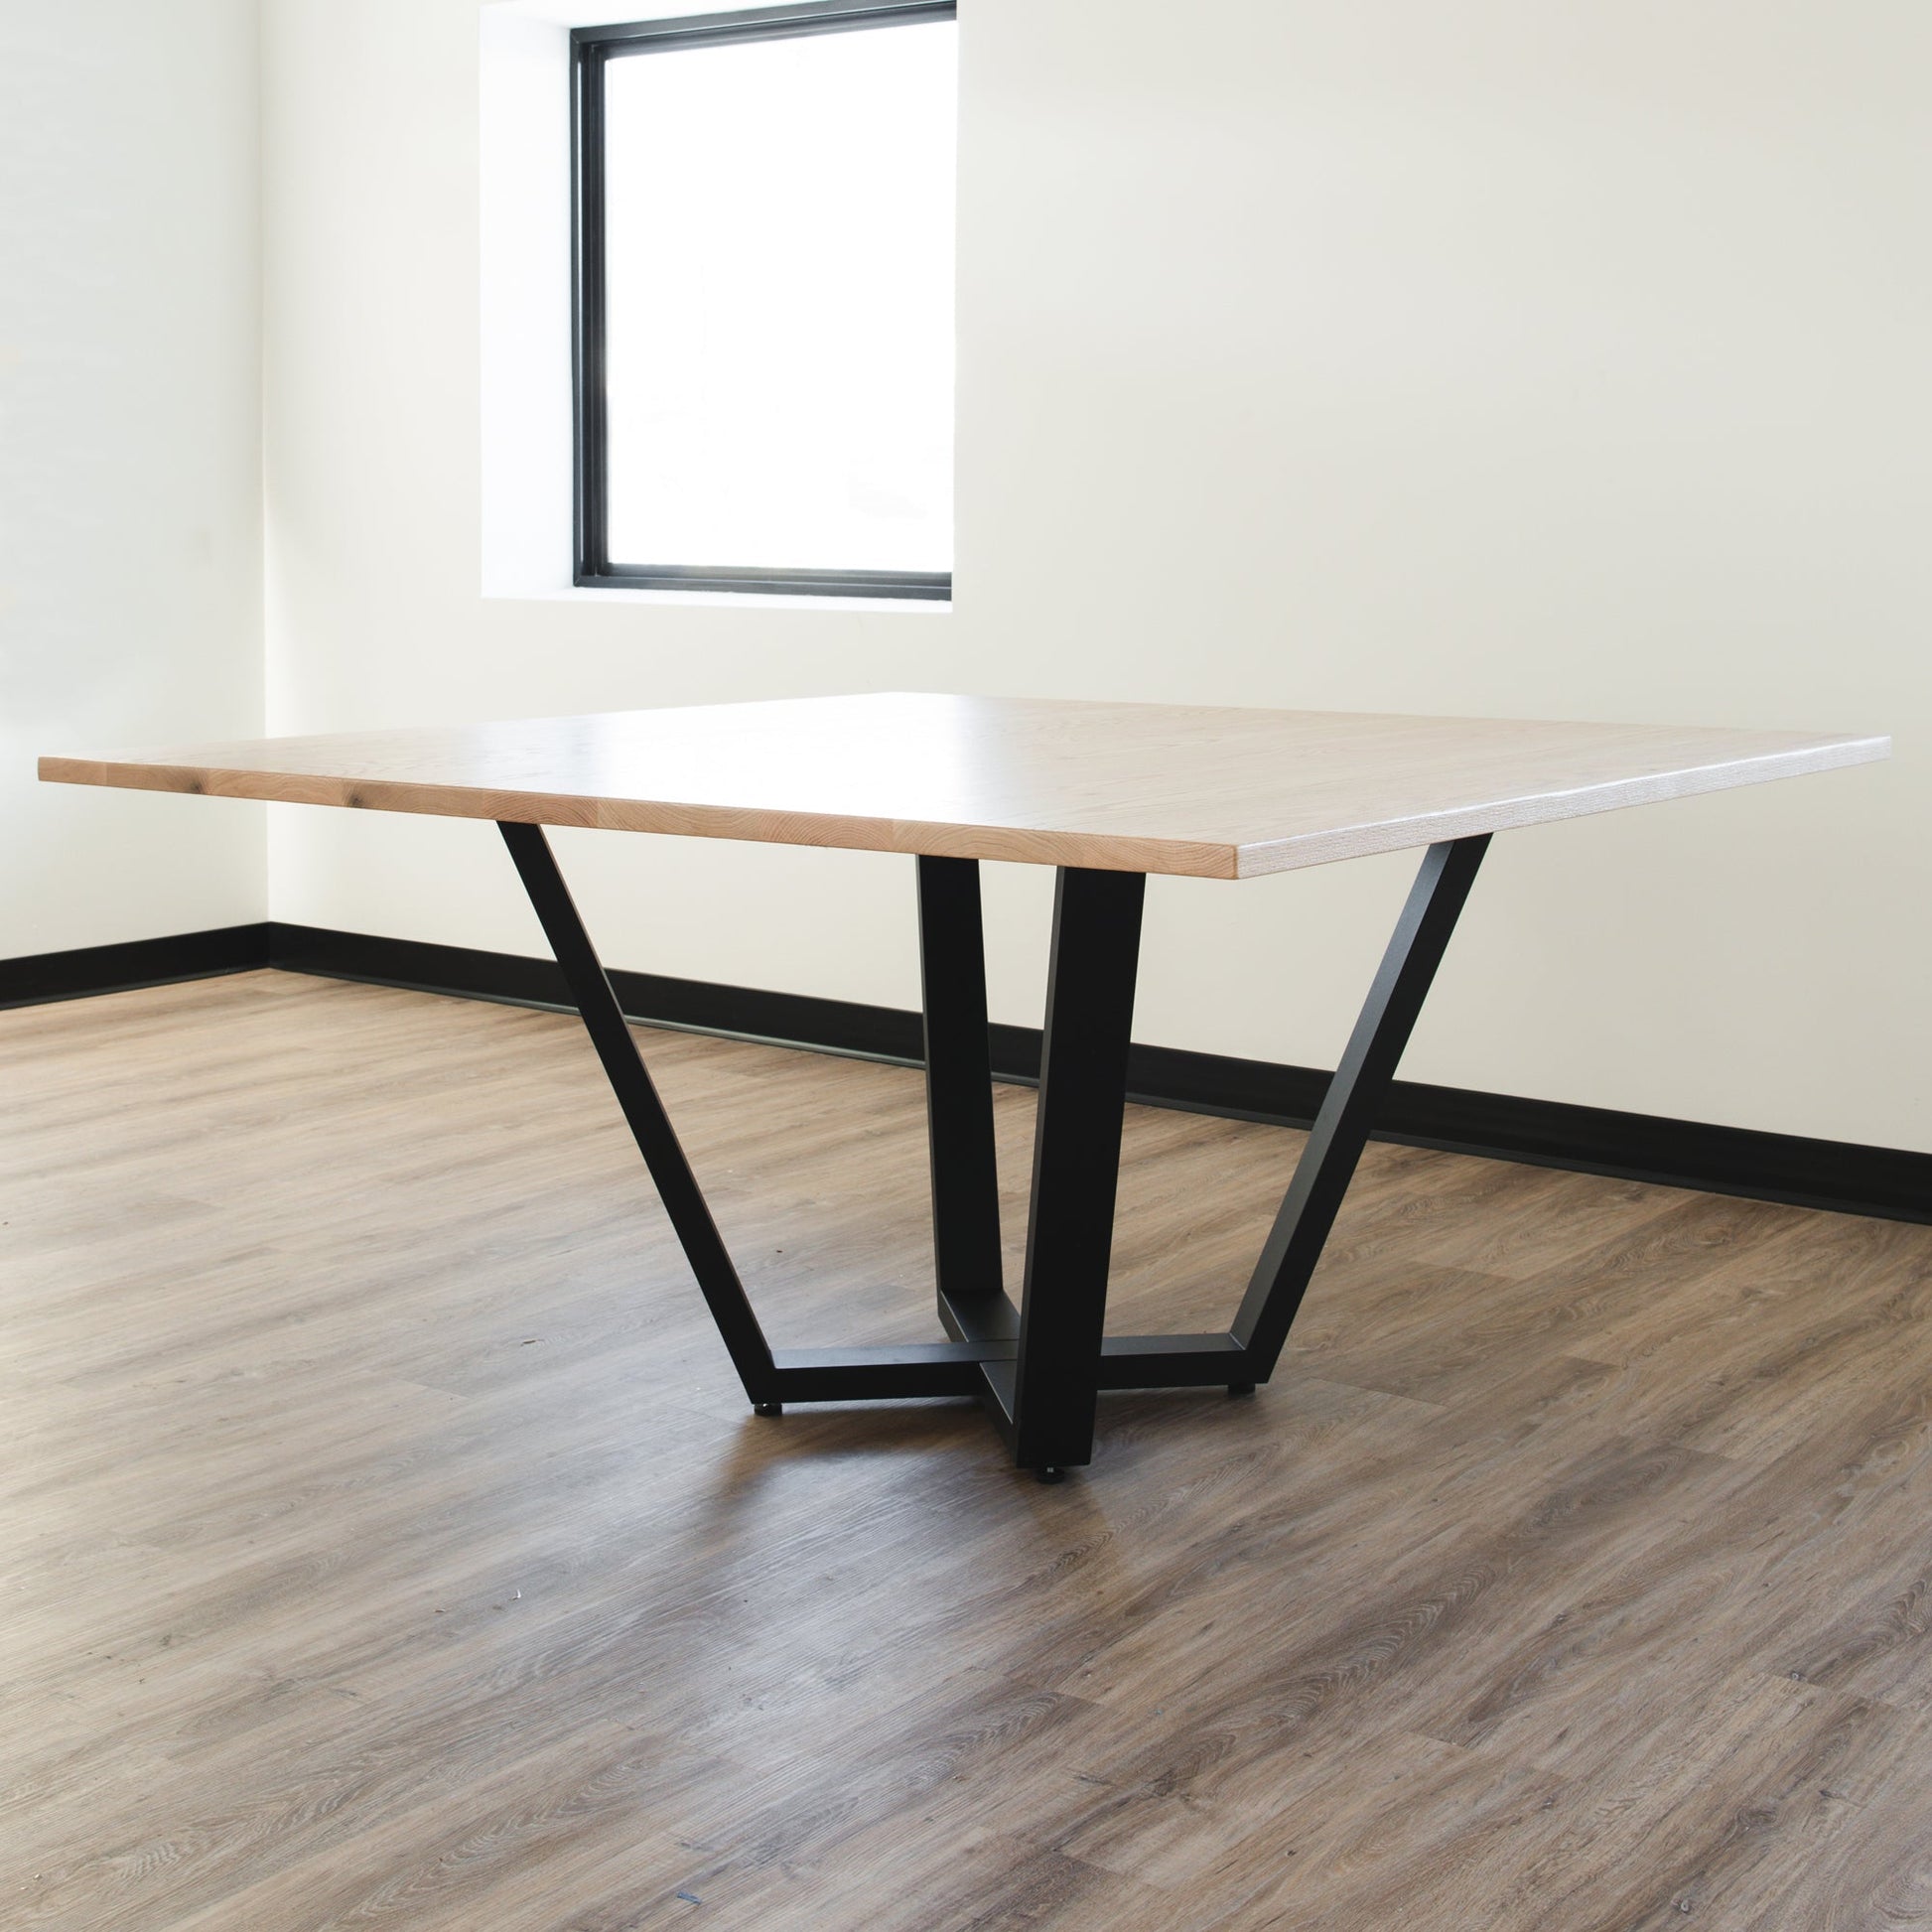 The Monroe Table - FargoWoodworks